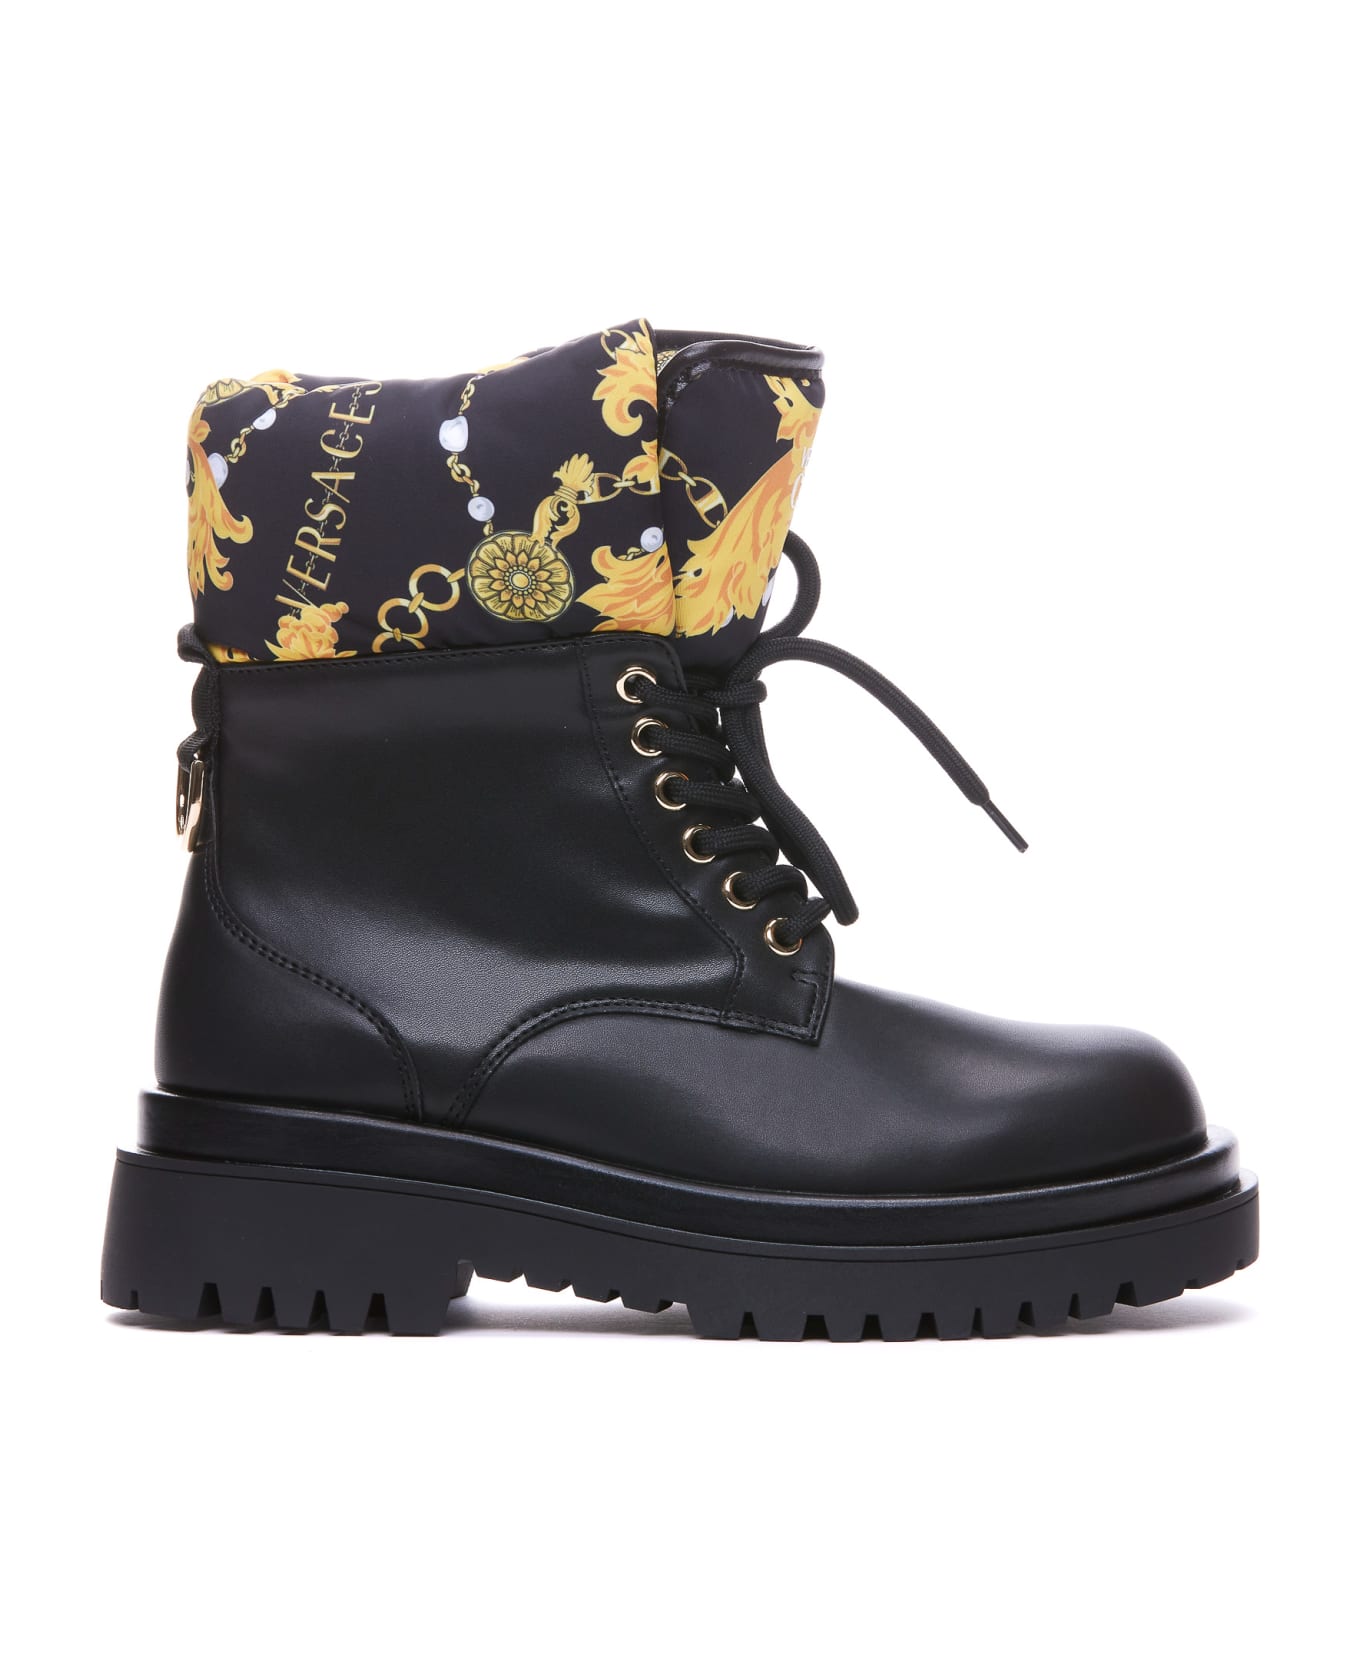 Versace Jeans Couture Couture Chain Ankle Booties - Black